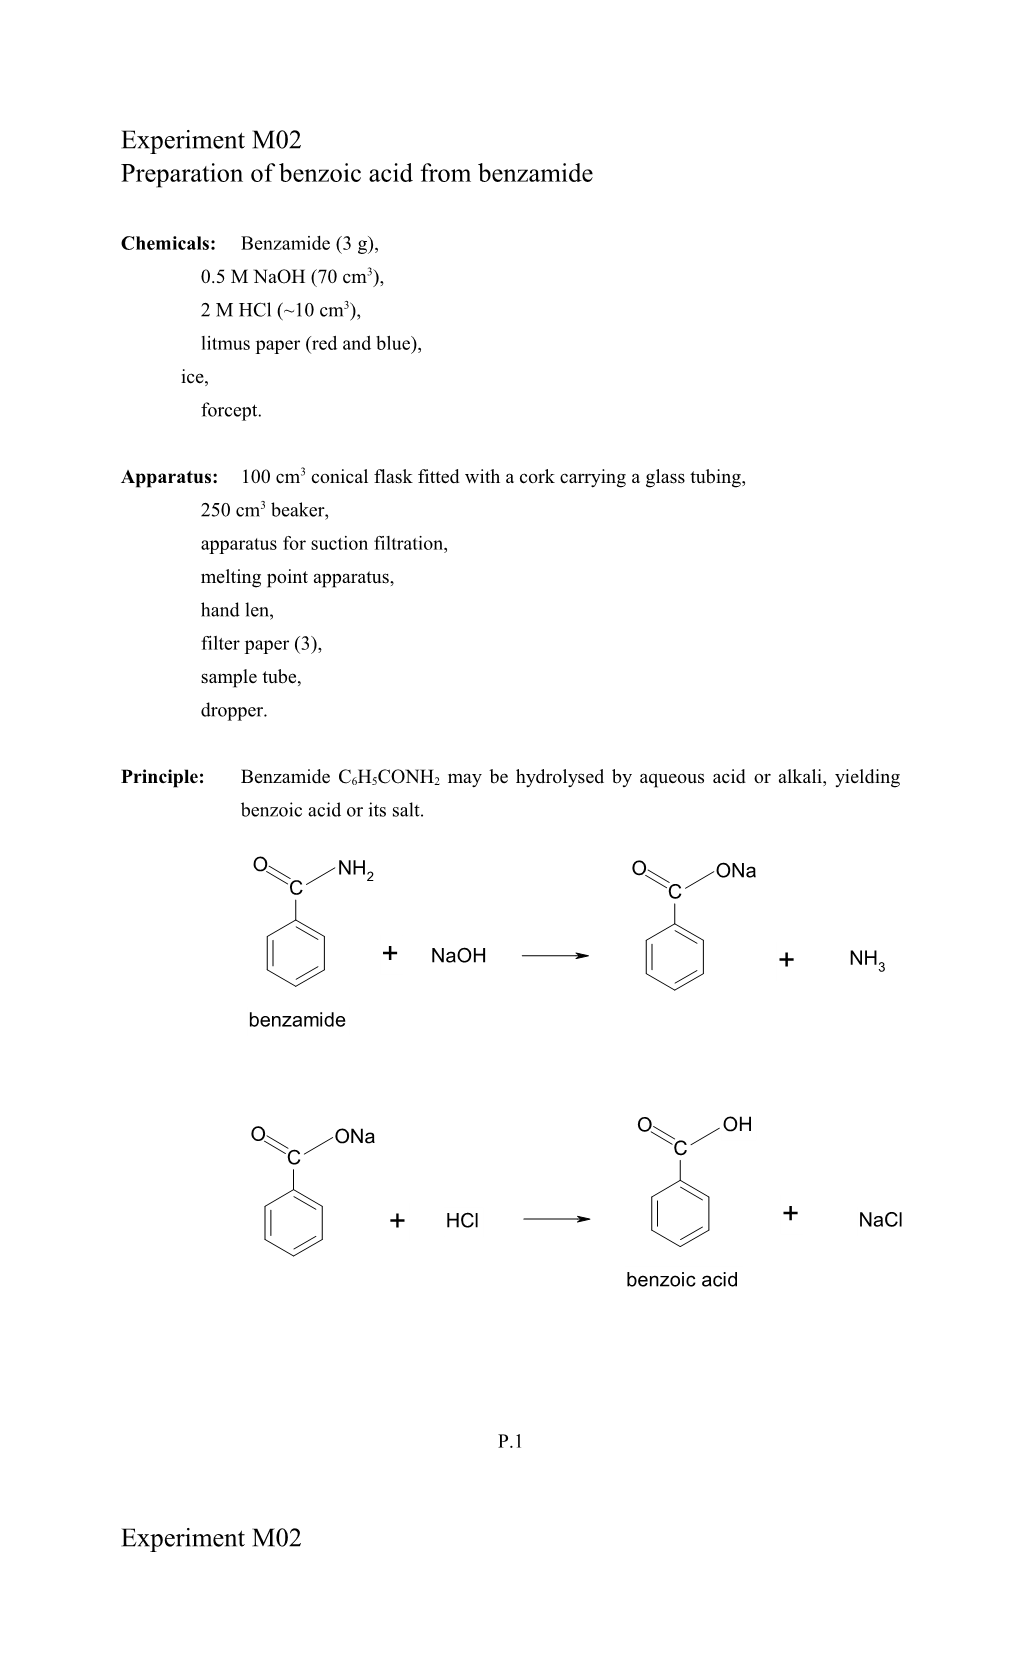 Preparation of Benzoic Acid from Benzamide